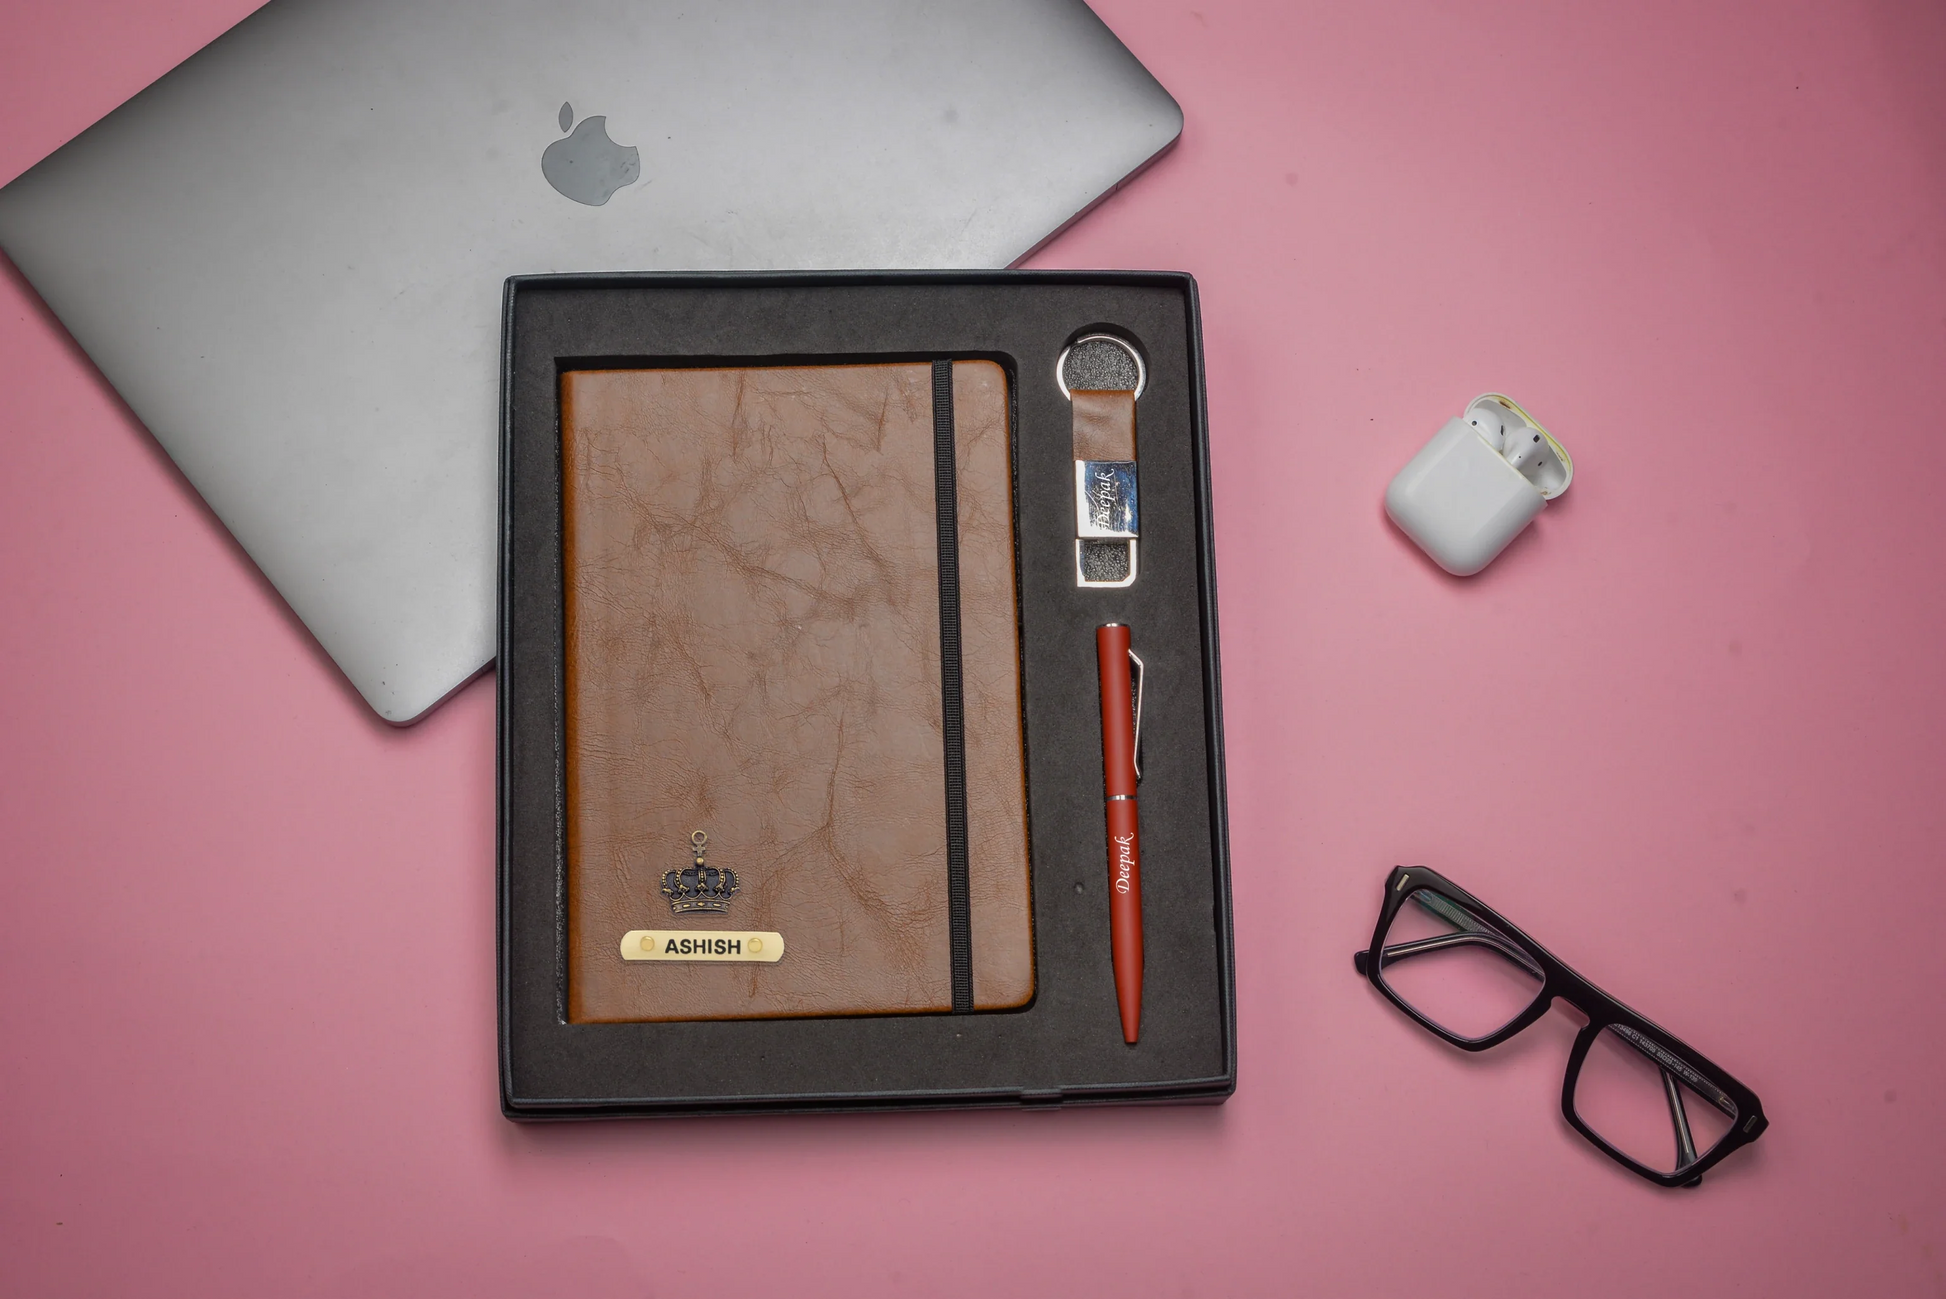 "Stay motivated and achieve your goals with our inspiring corporate combo. Our motivational diary, reliable pen, and inspiring keychain will keep you focused and on track."